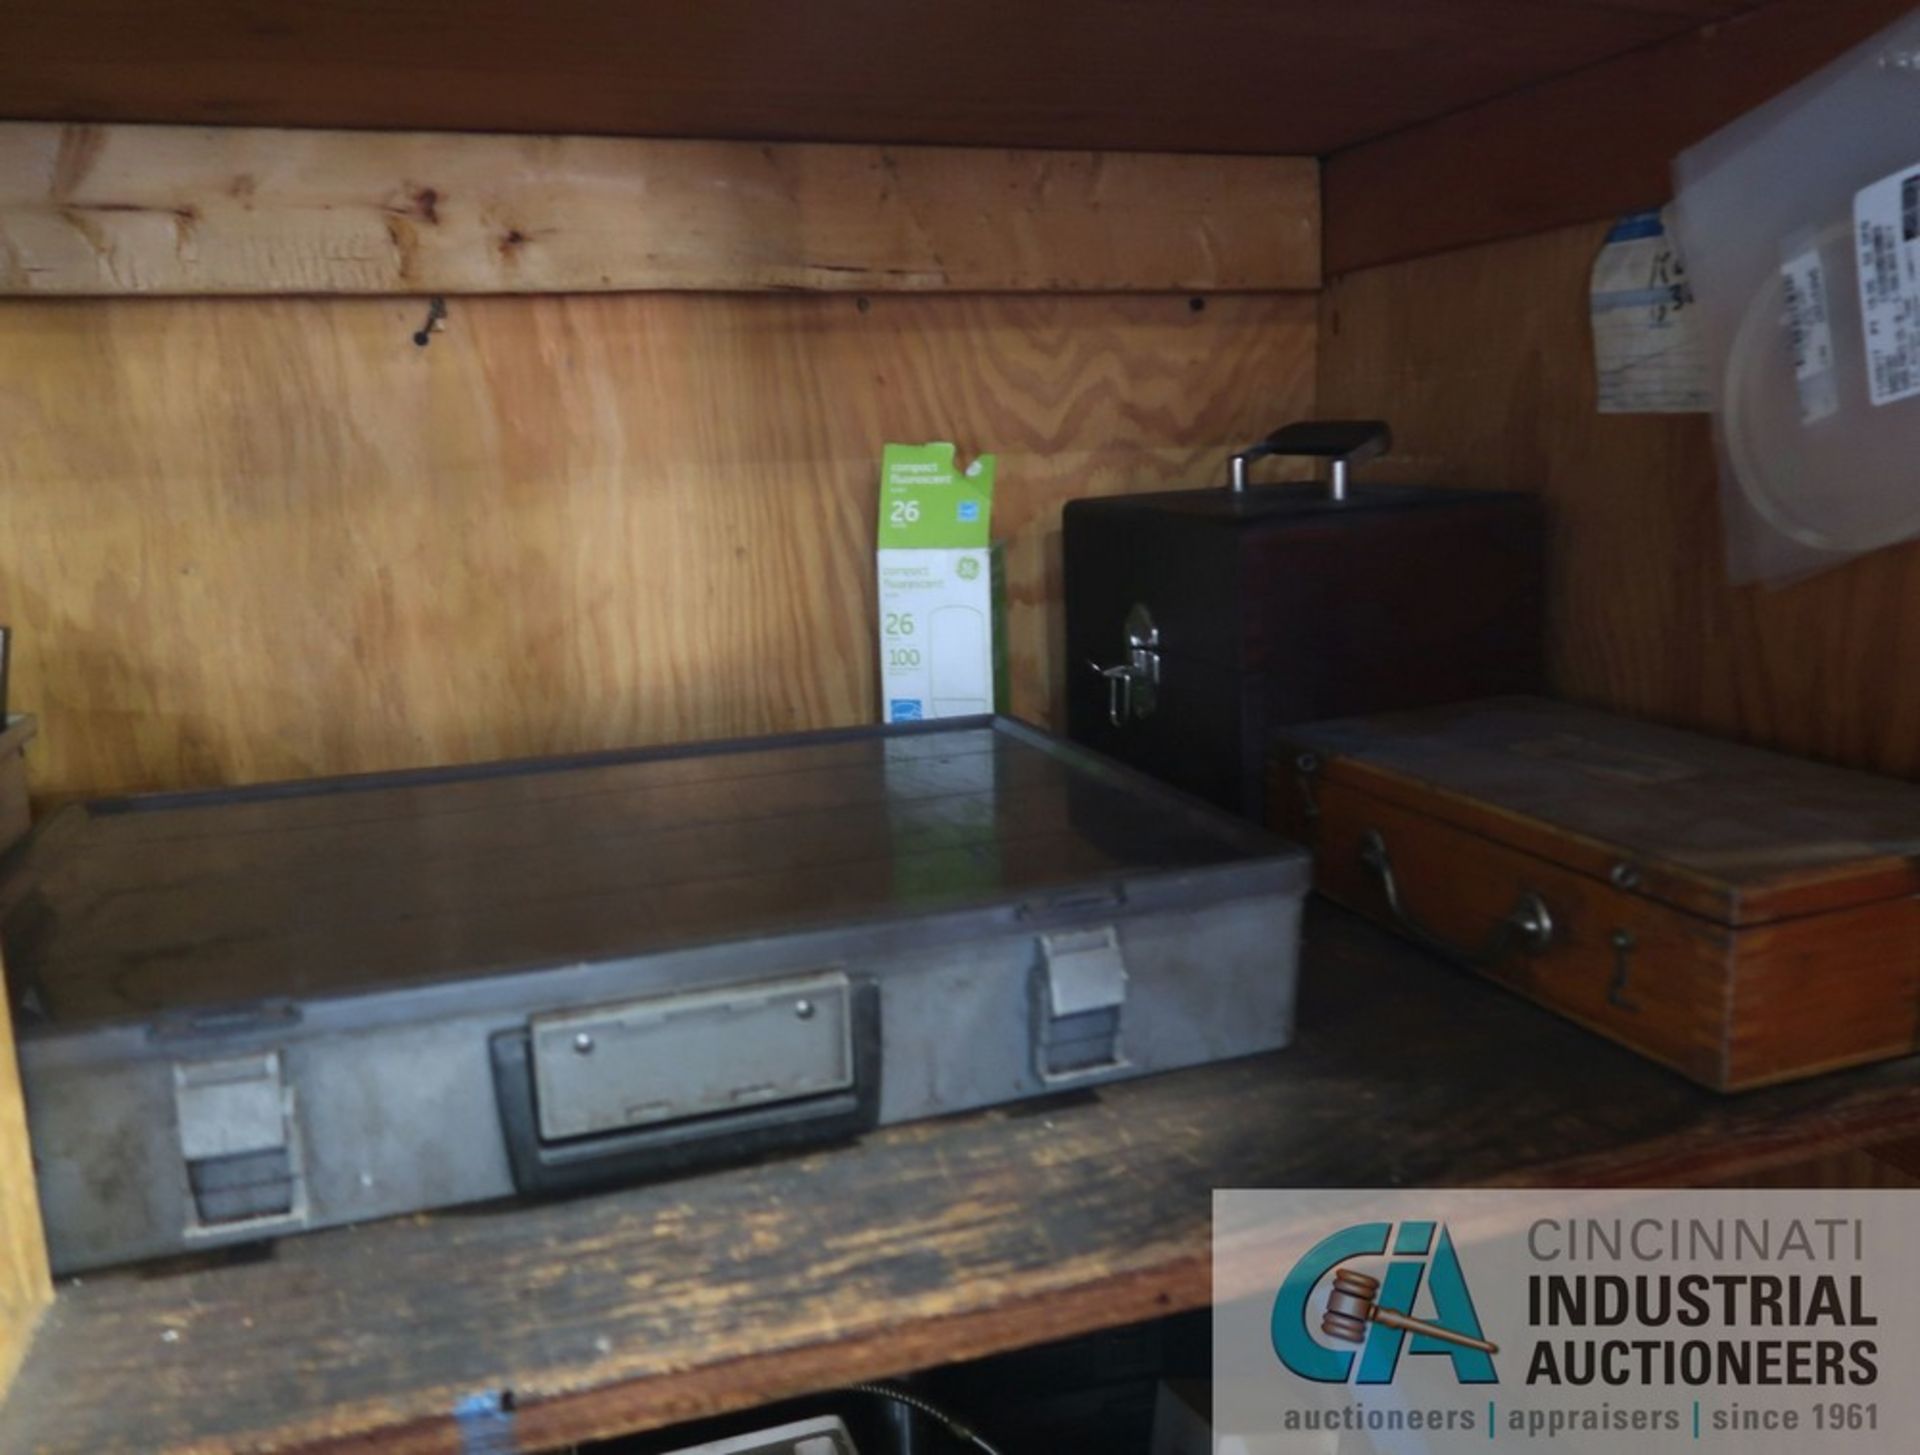 (LOT) MISCELLANEOUS COLLETS, TOOLING, FIXTURES AND OTHER RELATED ITEMS WITH TWO-DOOR CABINET - Image 7 of 10